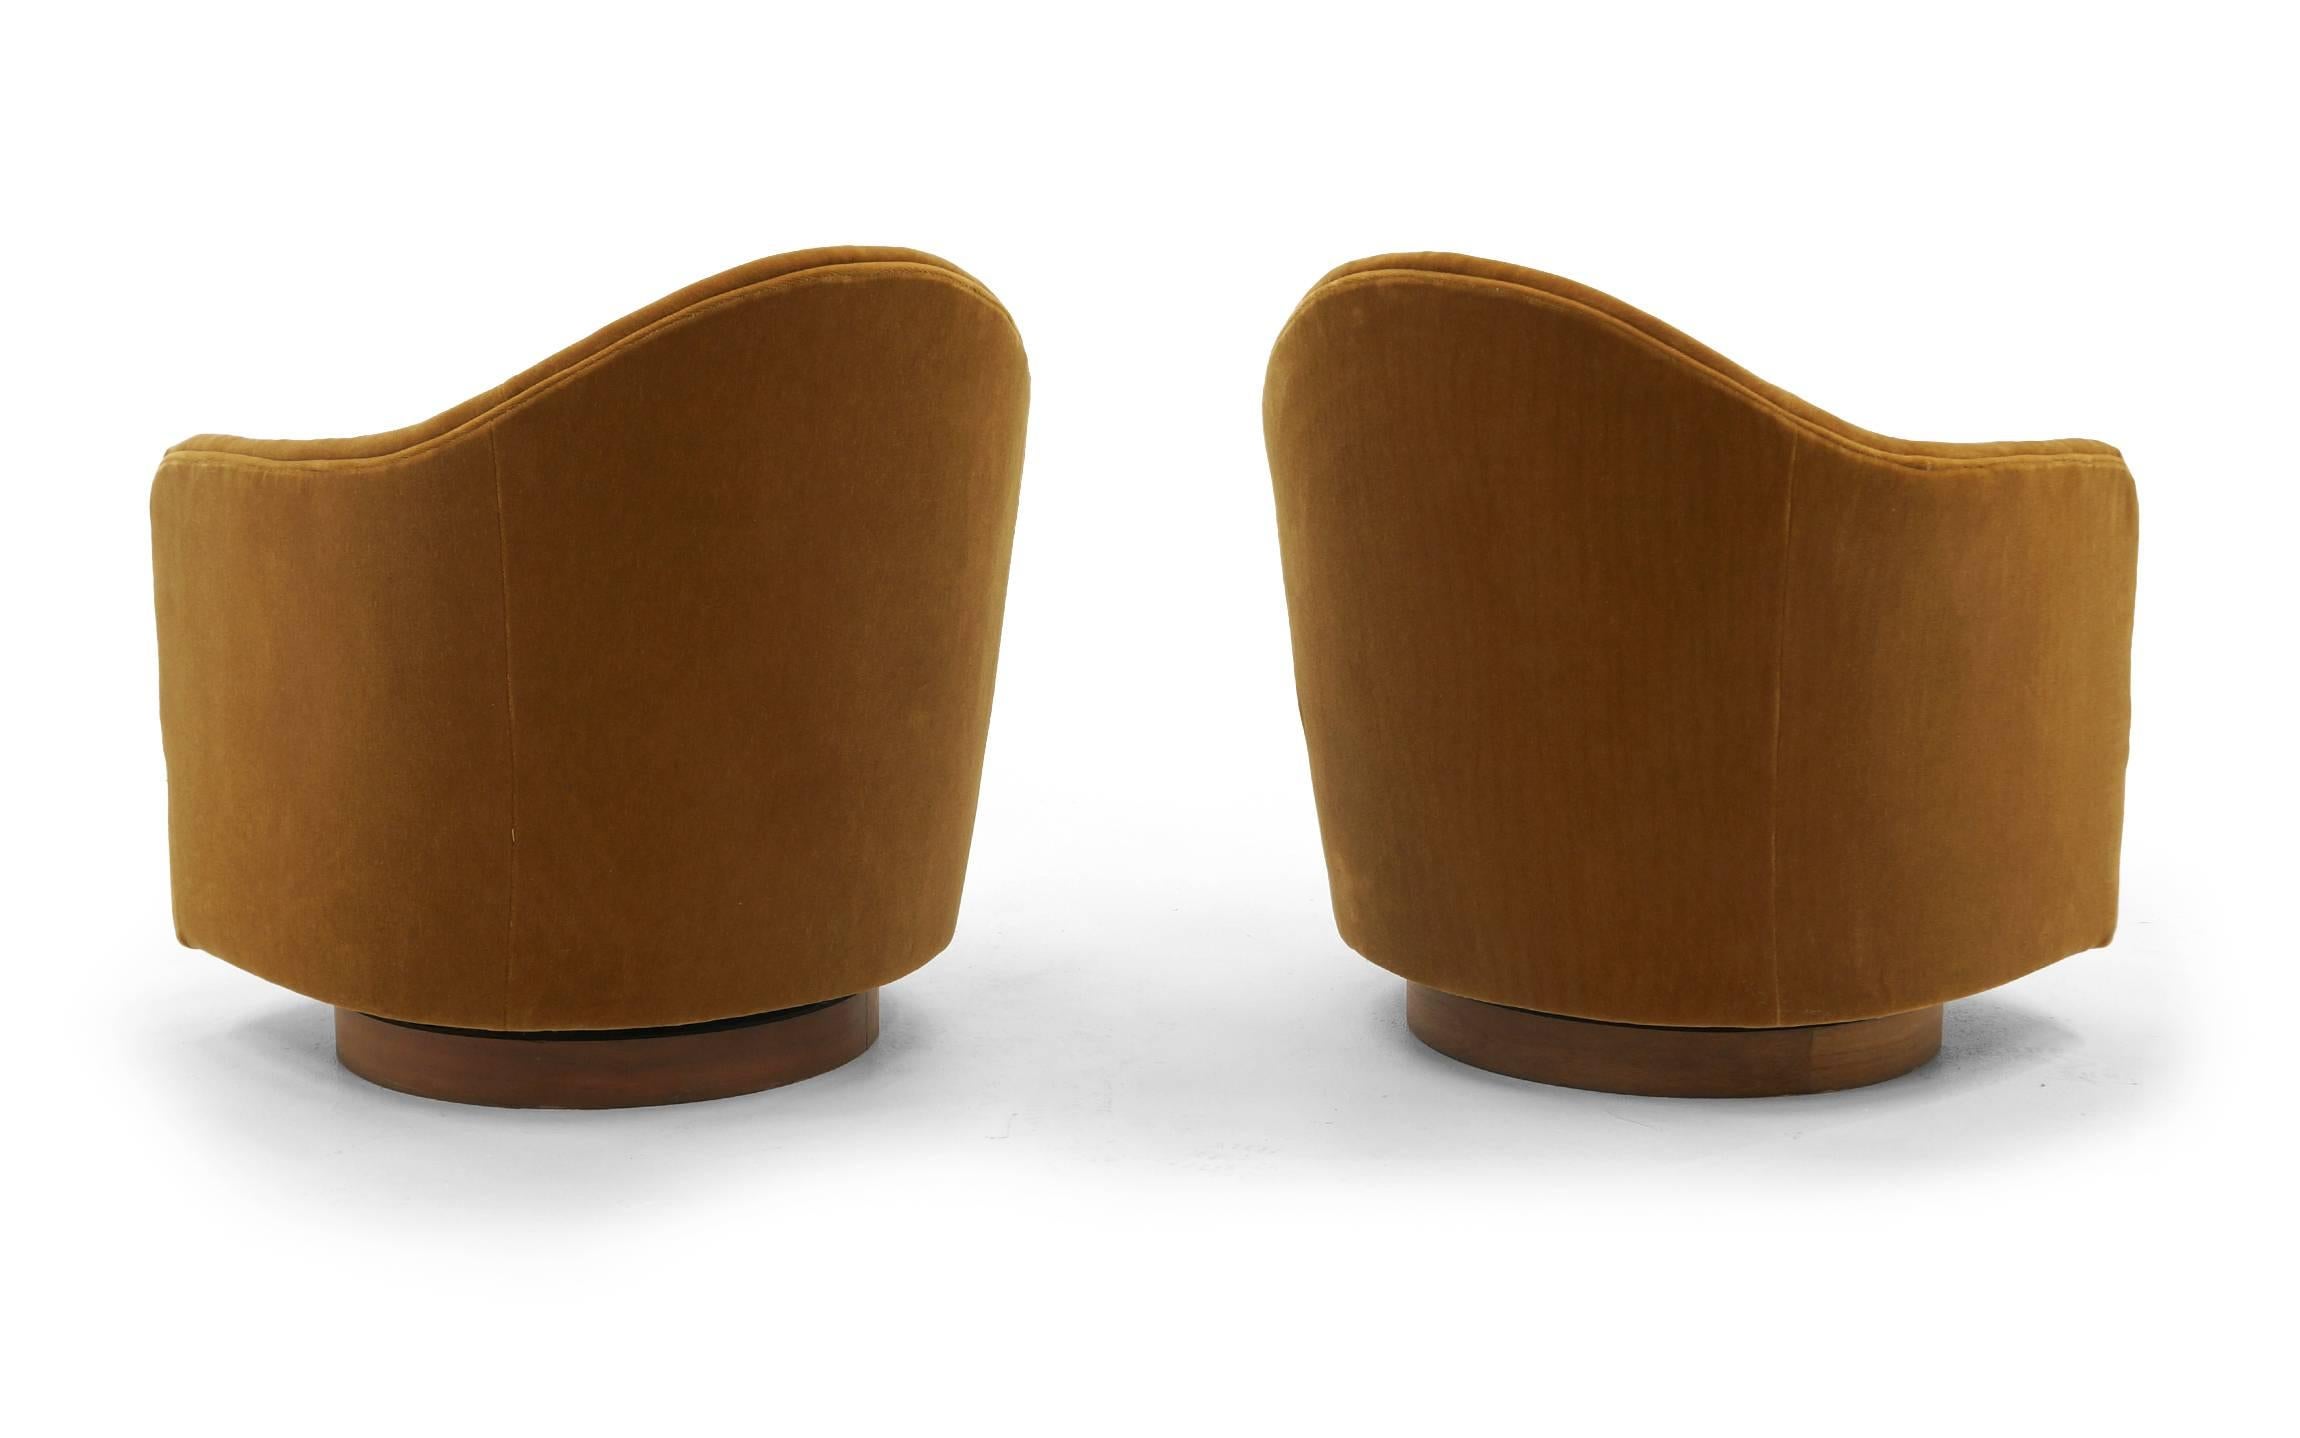 American Pair of Tilt and Swivel Barrel Chairs by Milo Baughman.  Caramel color Mohair.